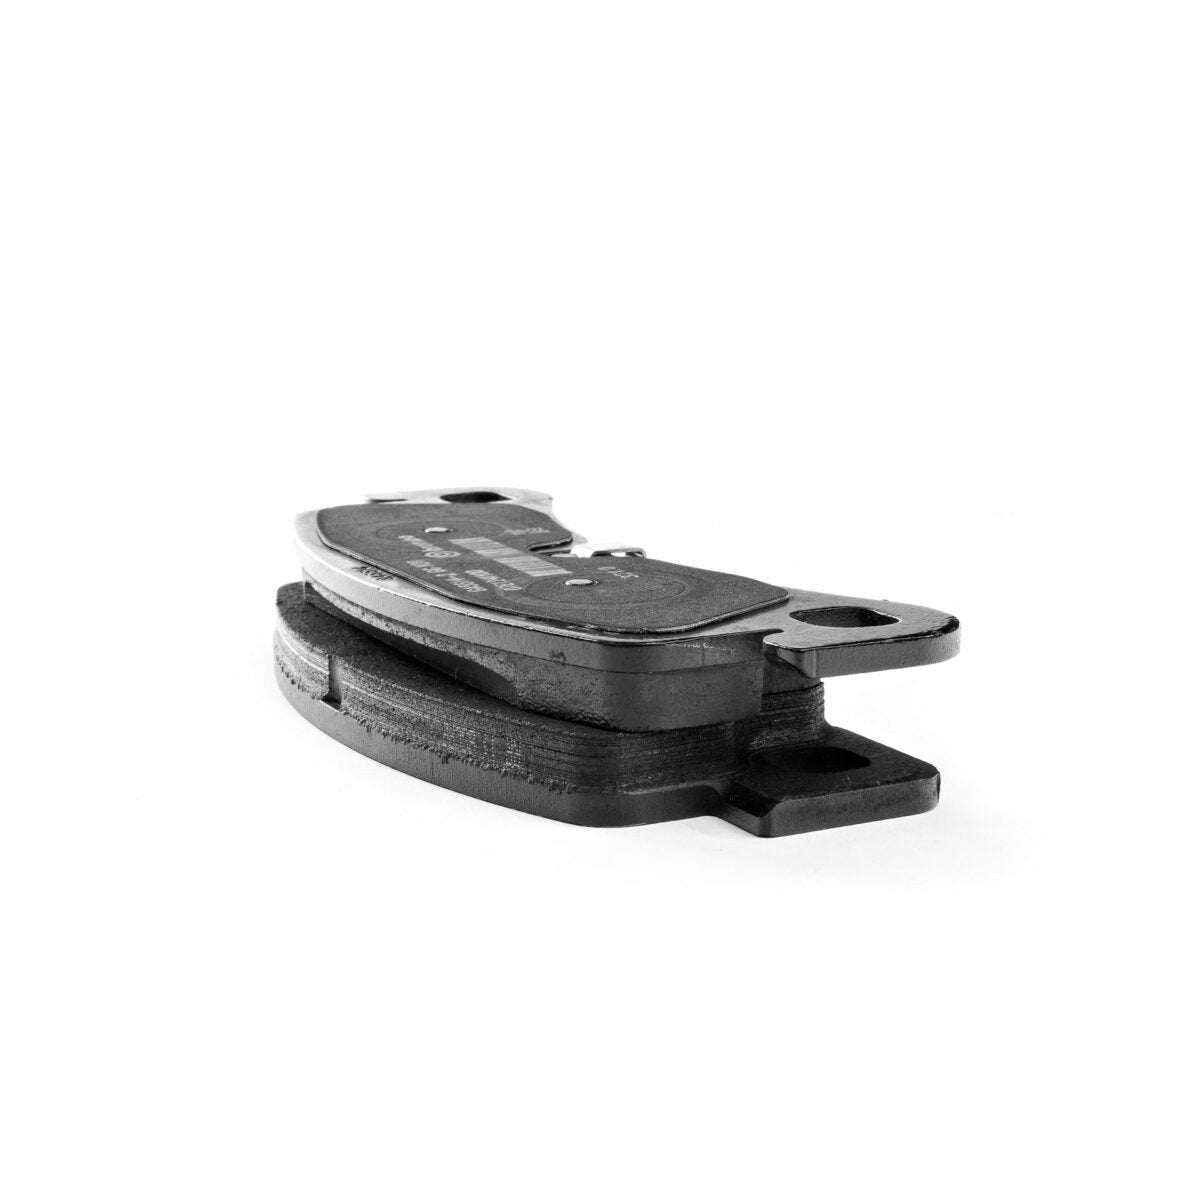 Unplugged Performance - Model S/X plaid UP x PFC High Performance Brake Pads (for OEM rotors) 2021+